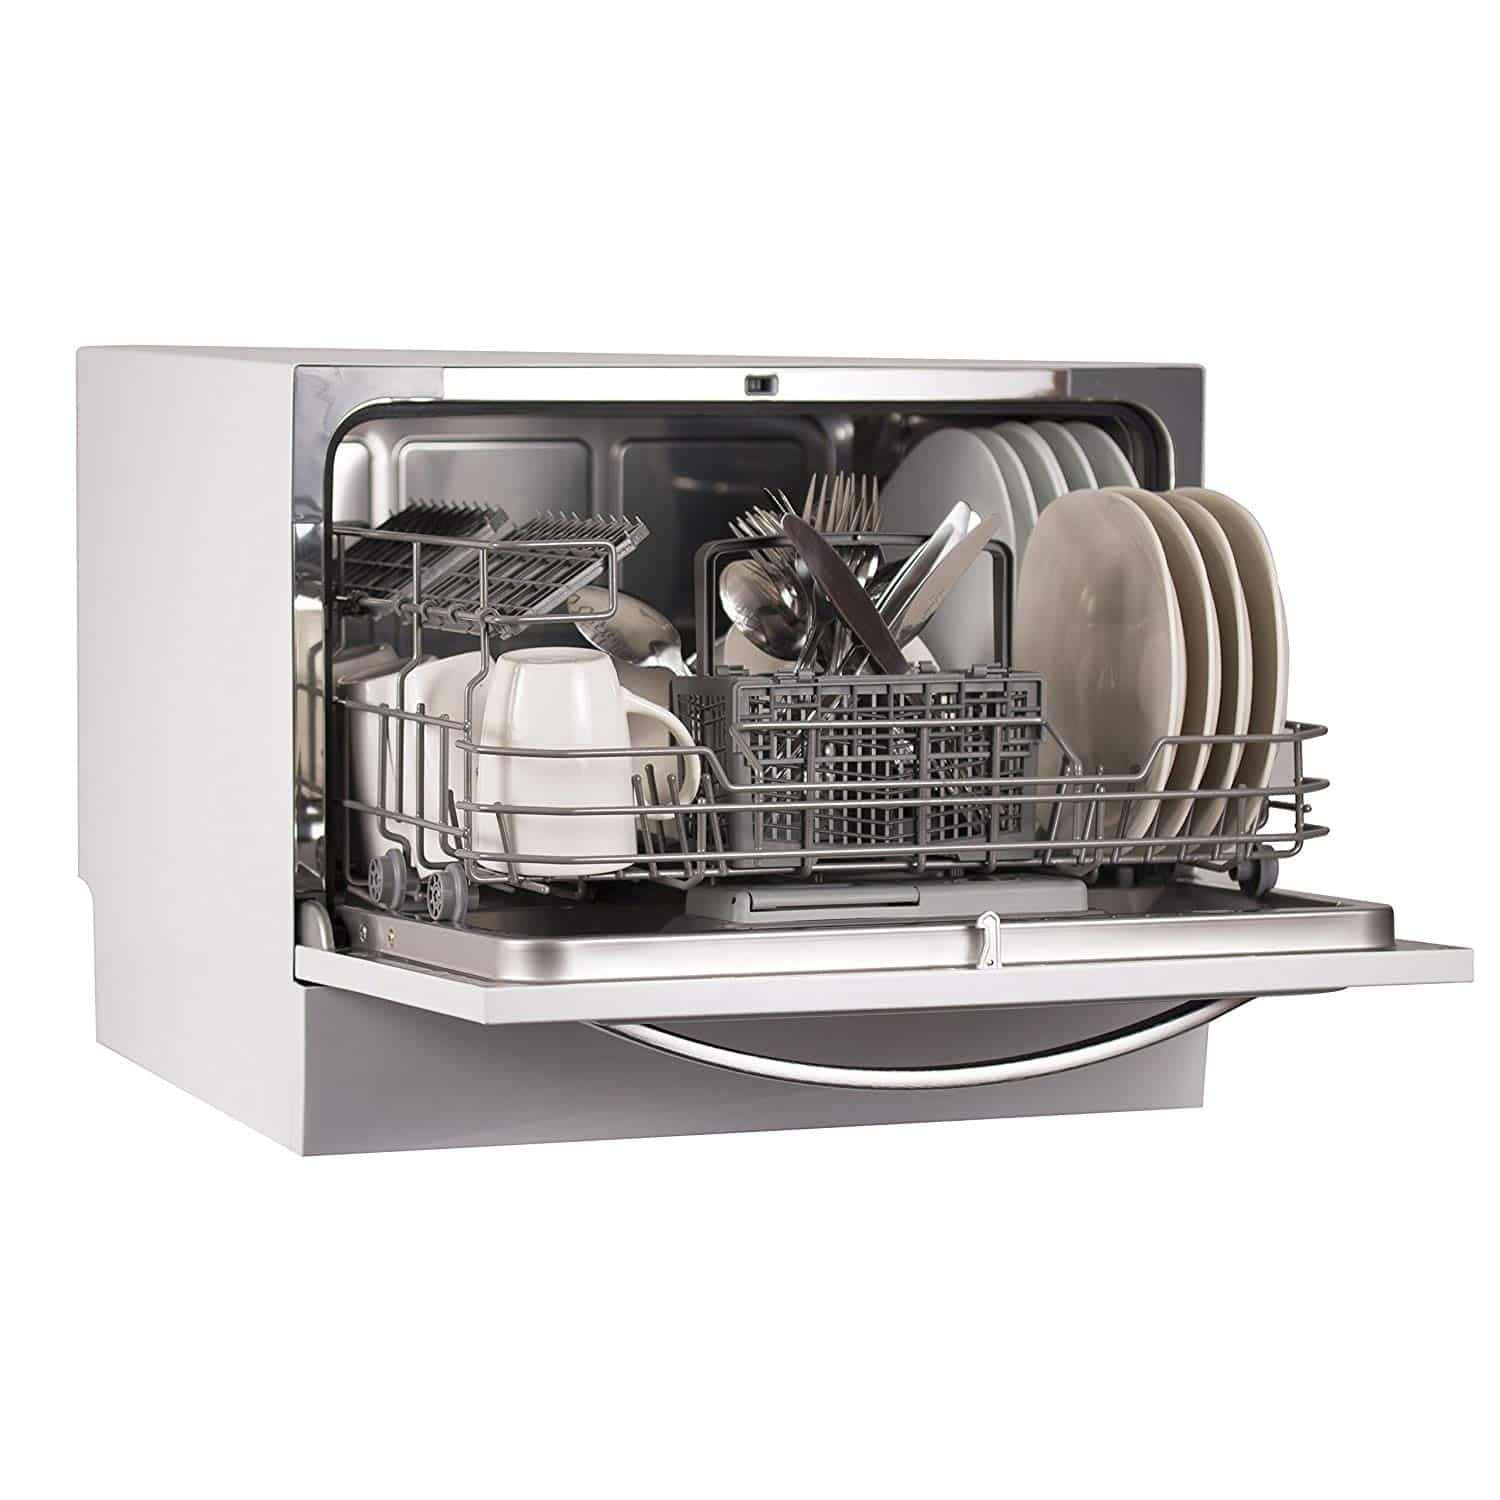 Top 10 Best Countertop Dishwashers In 2020 Reviews Guide